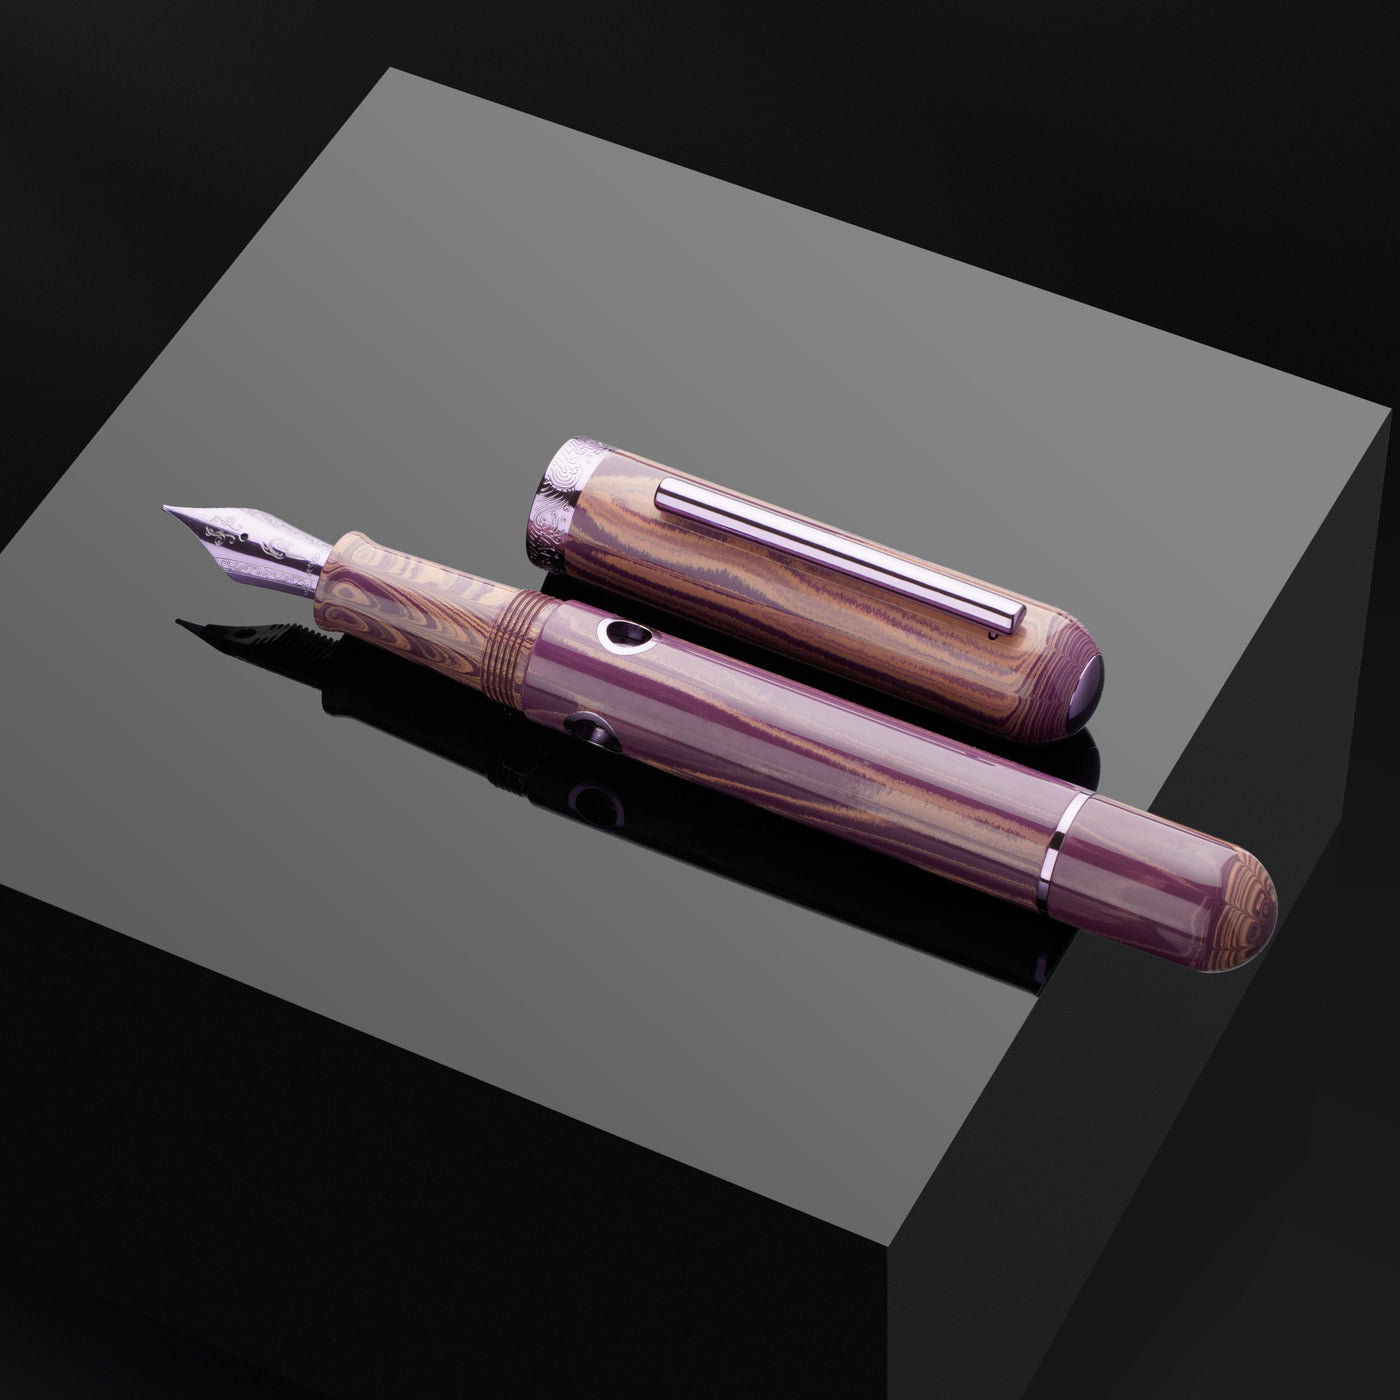 Nahvalur (Narwhal) Nautilus Fountain Pen - Mousseline Lilas (Limited Edition)